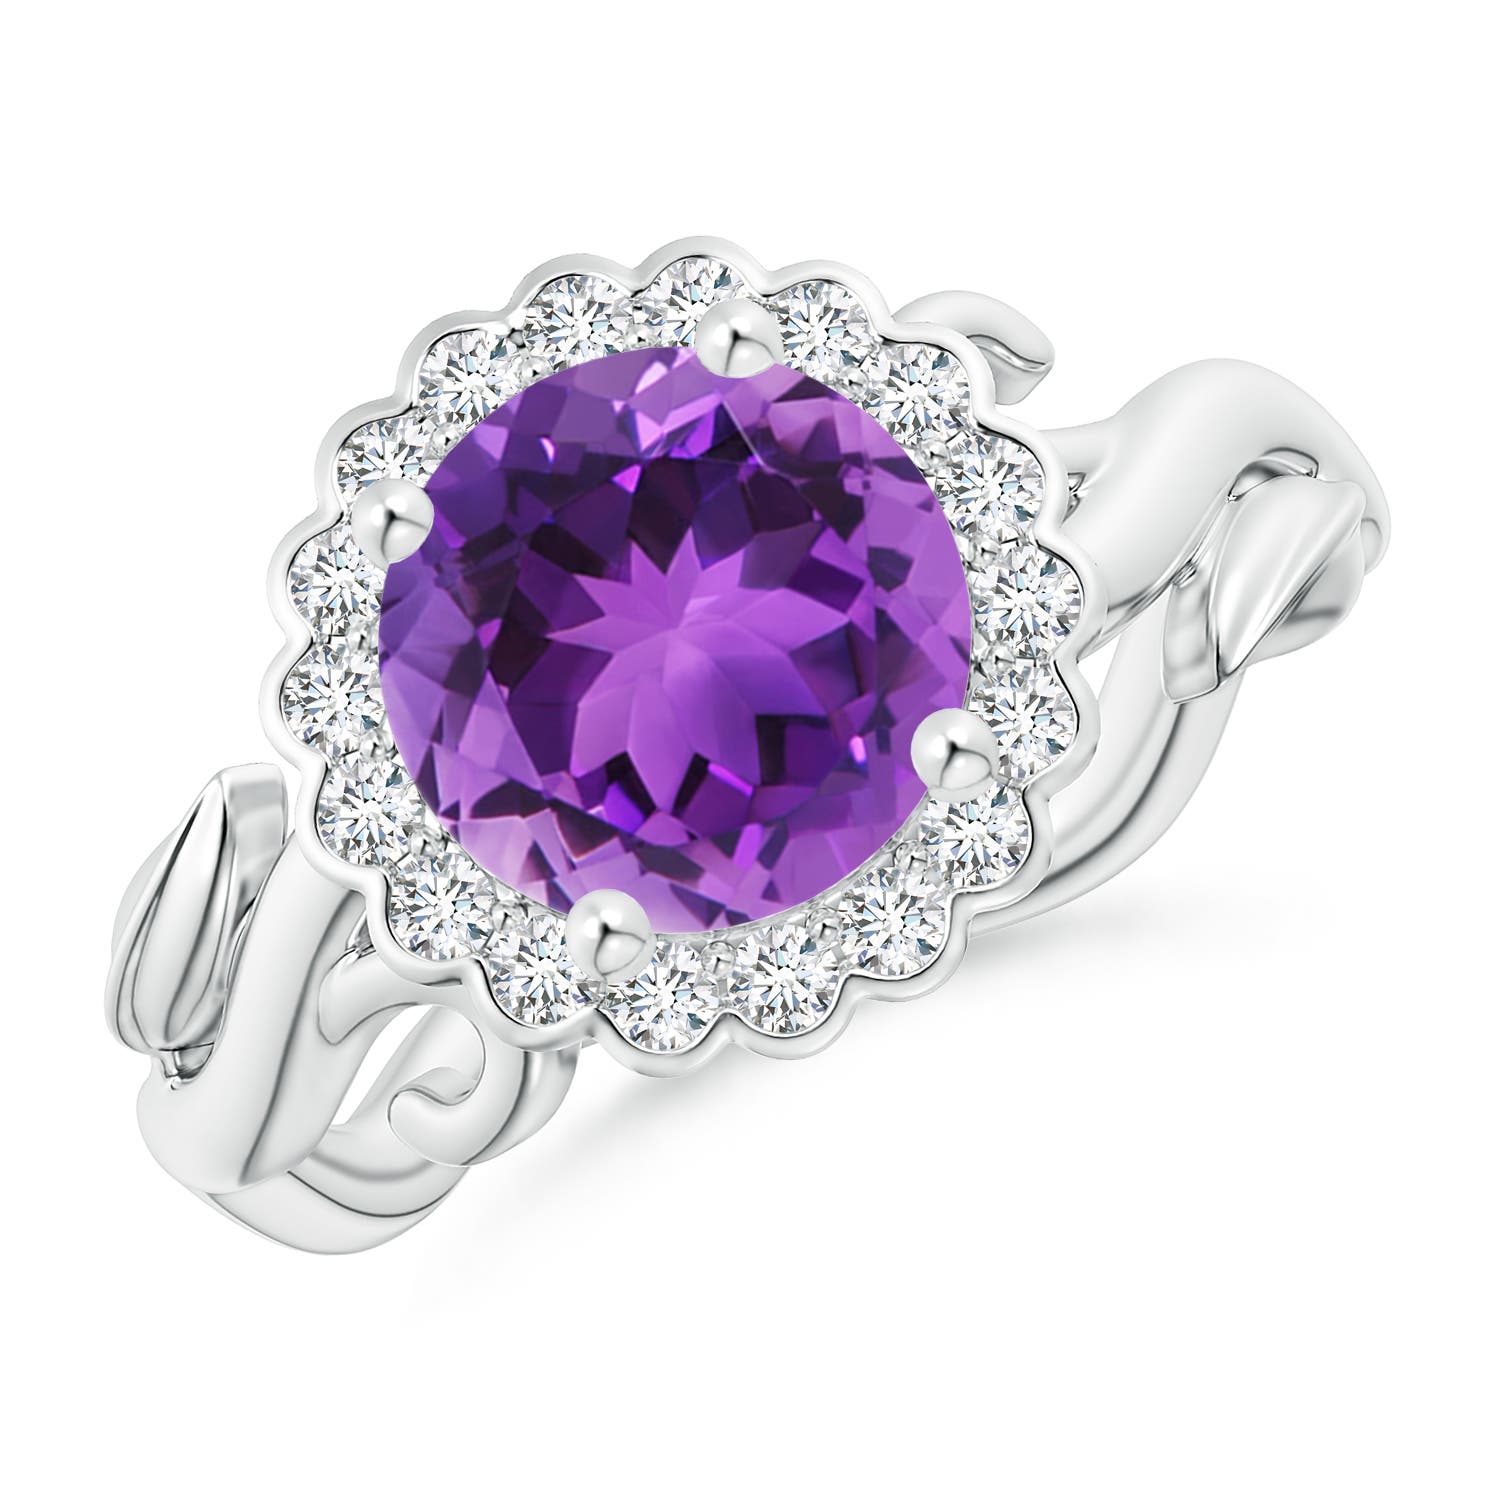 AAA - Amethyst / 1.95 CT / 14 KT White Gold